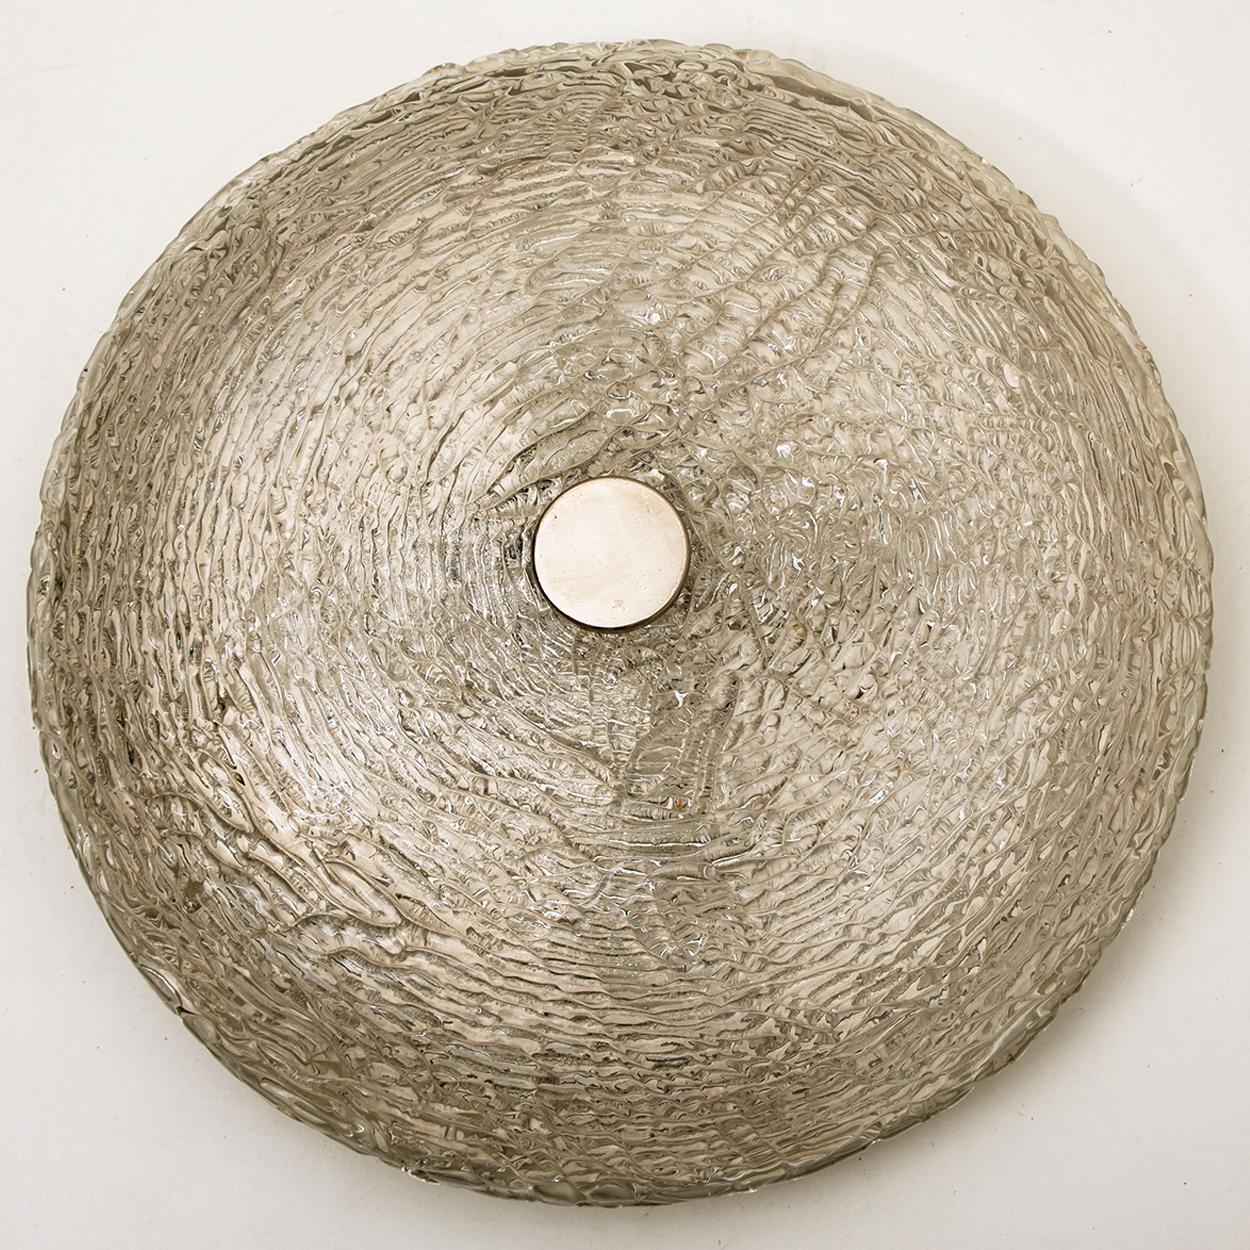 Mid-Century Modern textured ice glass light fixtures by manufacturer Kaiser, circa 1965. Clean, simple but high-end design. Illuminates beautifully. Each light fixture, often mistakenly attributed to Kalmar, features a huge handmade thick textured